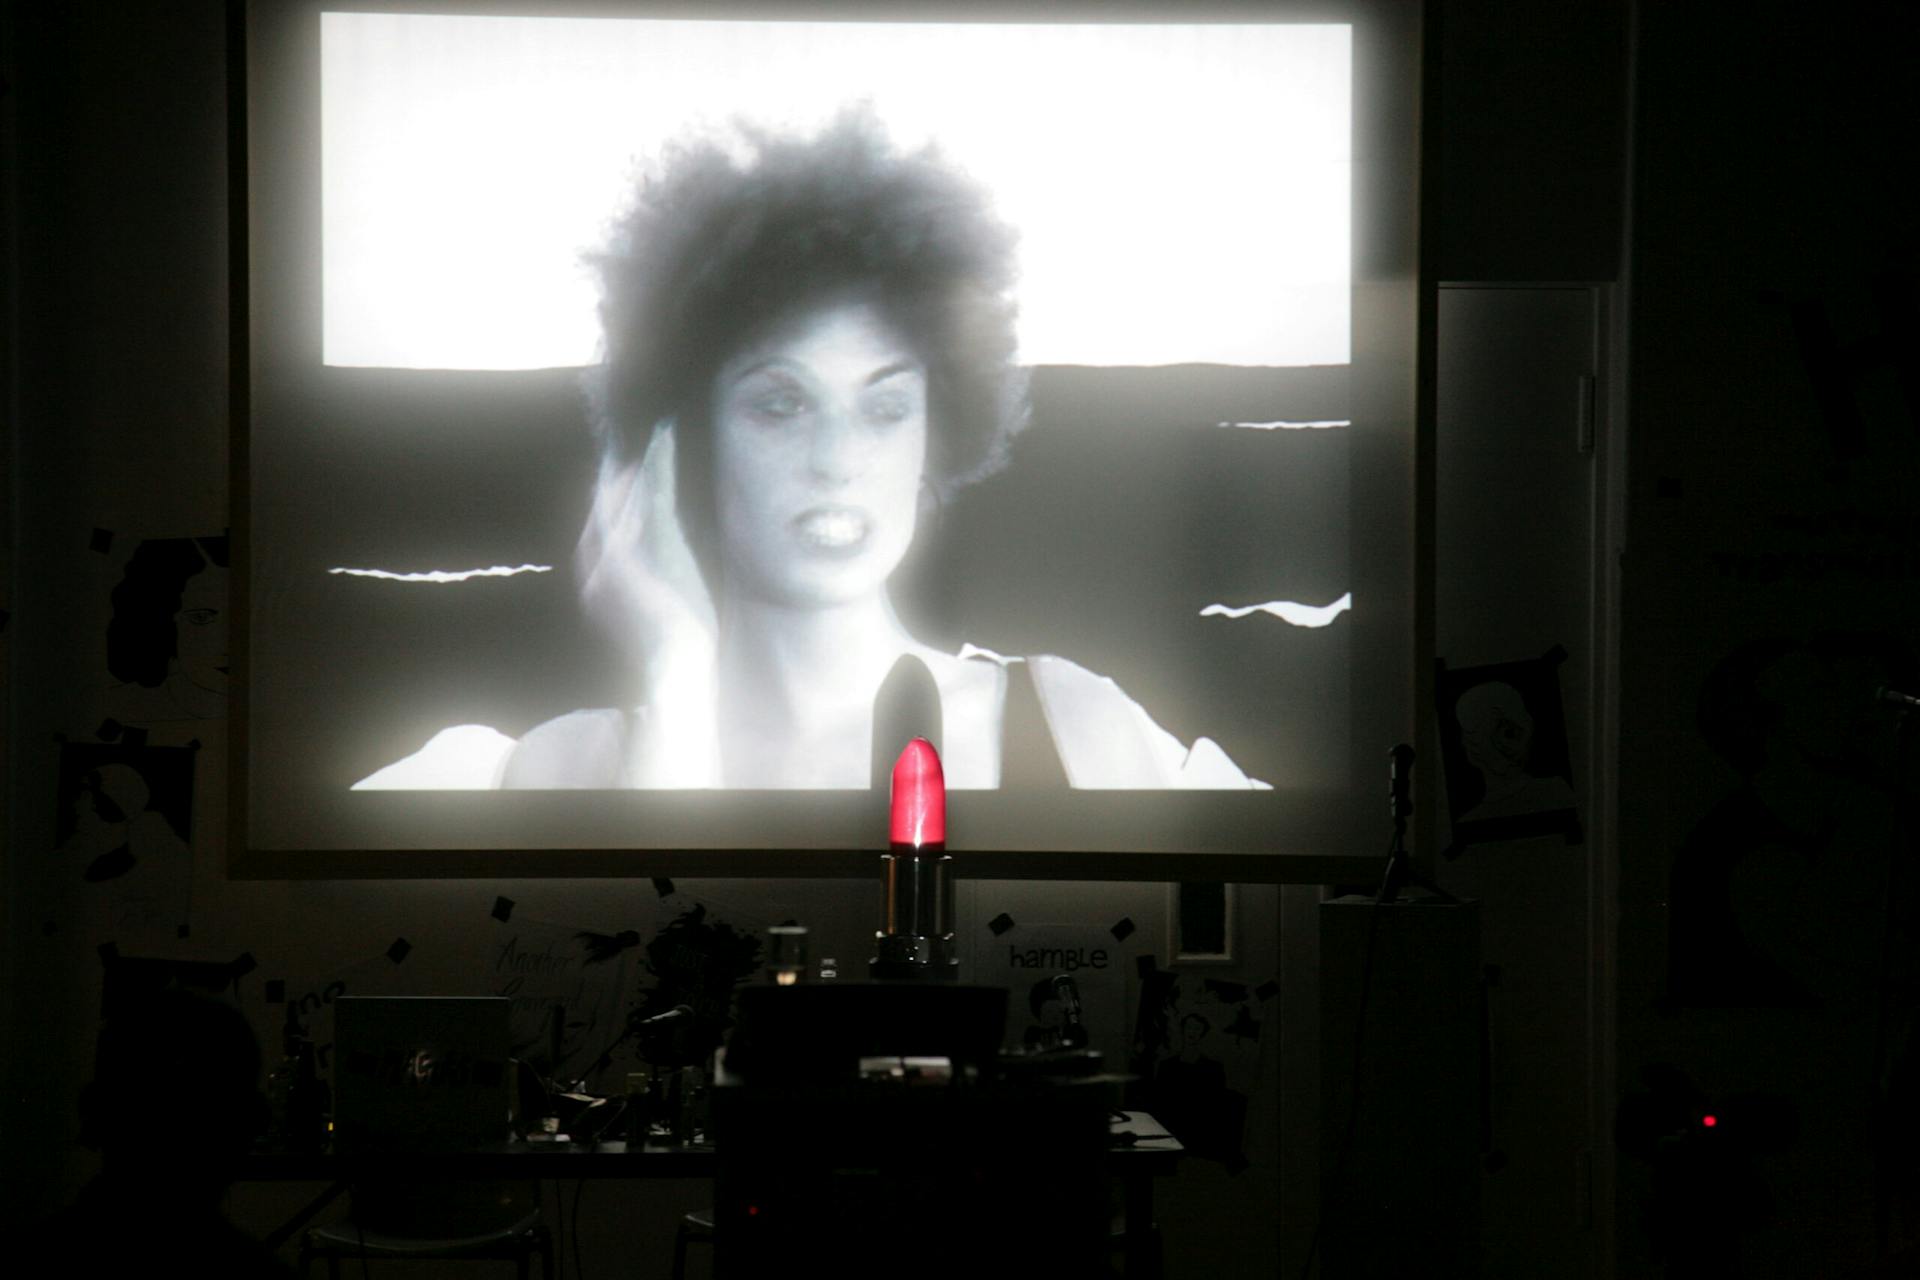 a black and white film is projected onto a screen in a darkened room. A performer is shown on screen with curly hair. A giant novelty red lipstick prop obscures part of the screen.